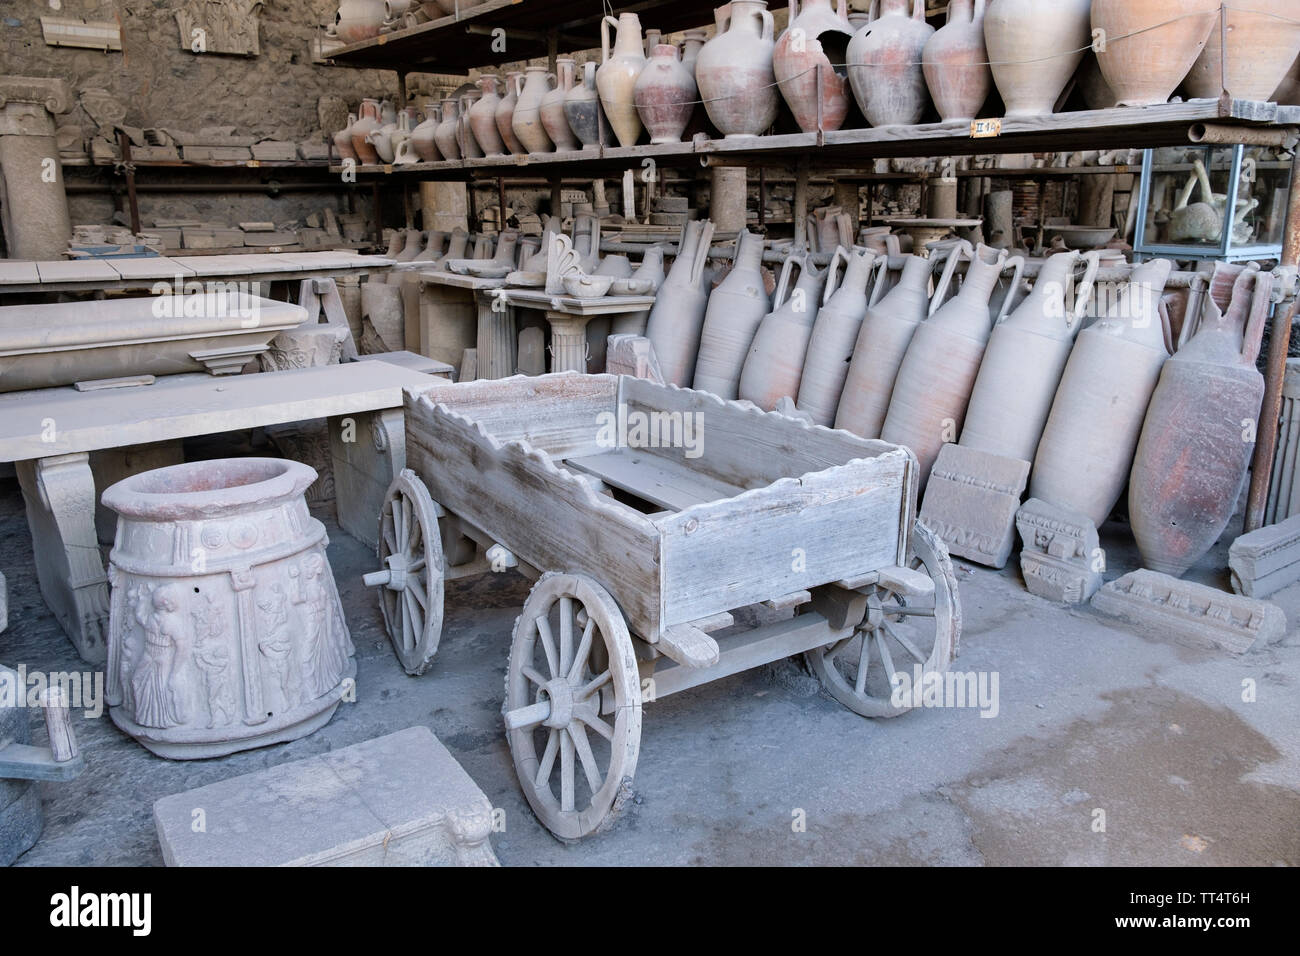 Cart or wagon, amphora and other finds from archaeological excavation of the ancient Roman town of Pompeii in Campania near Naples in Southern Italy Stock Photo